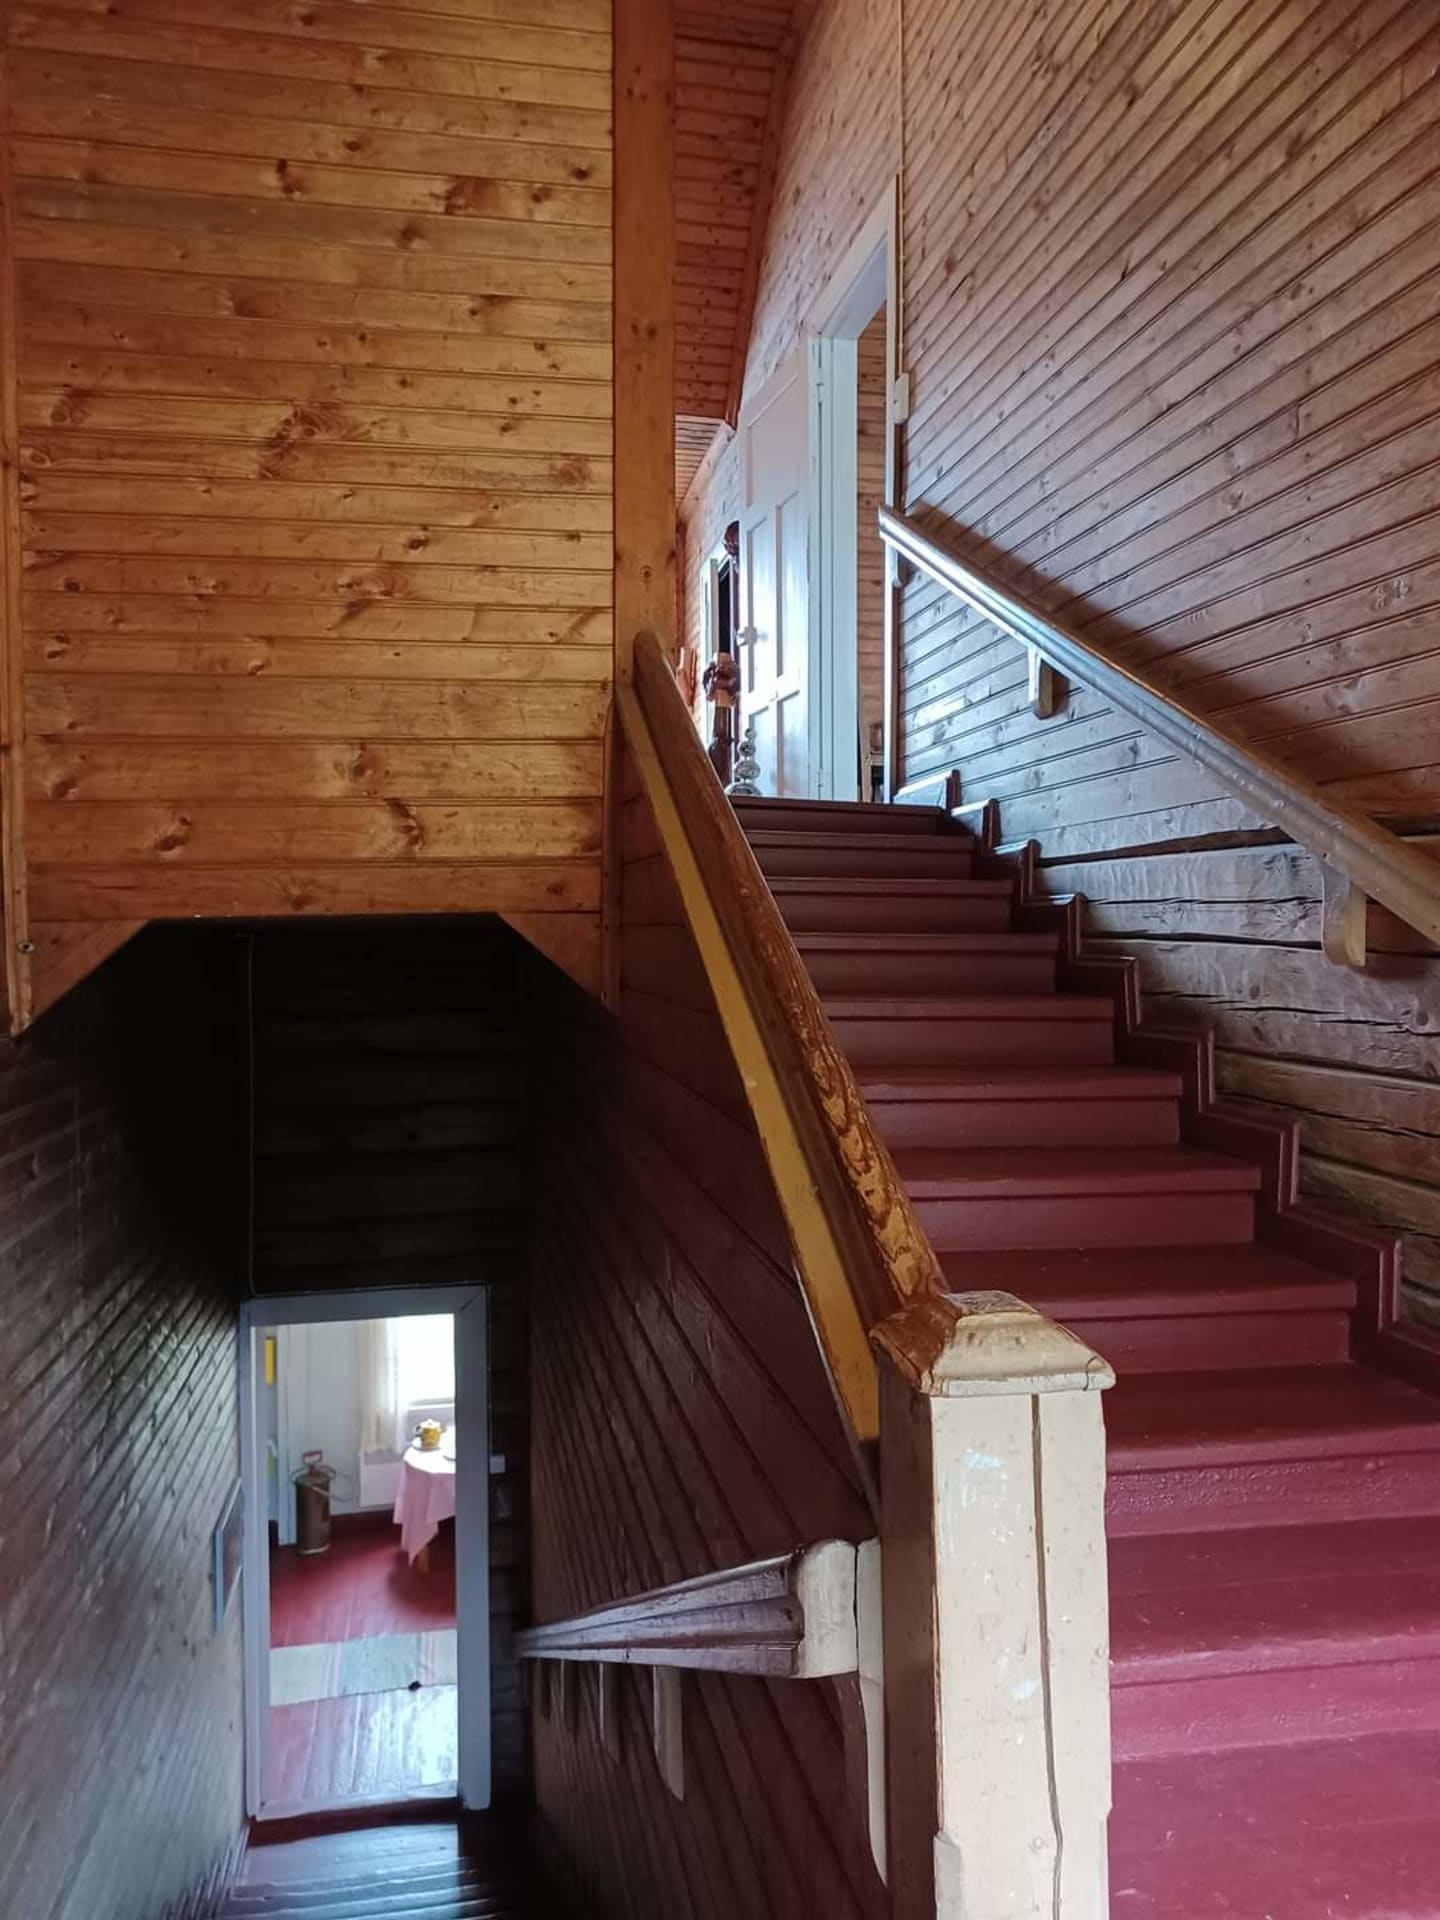 Stairs of the school building